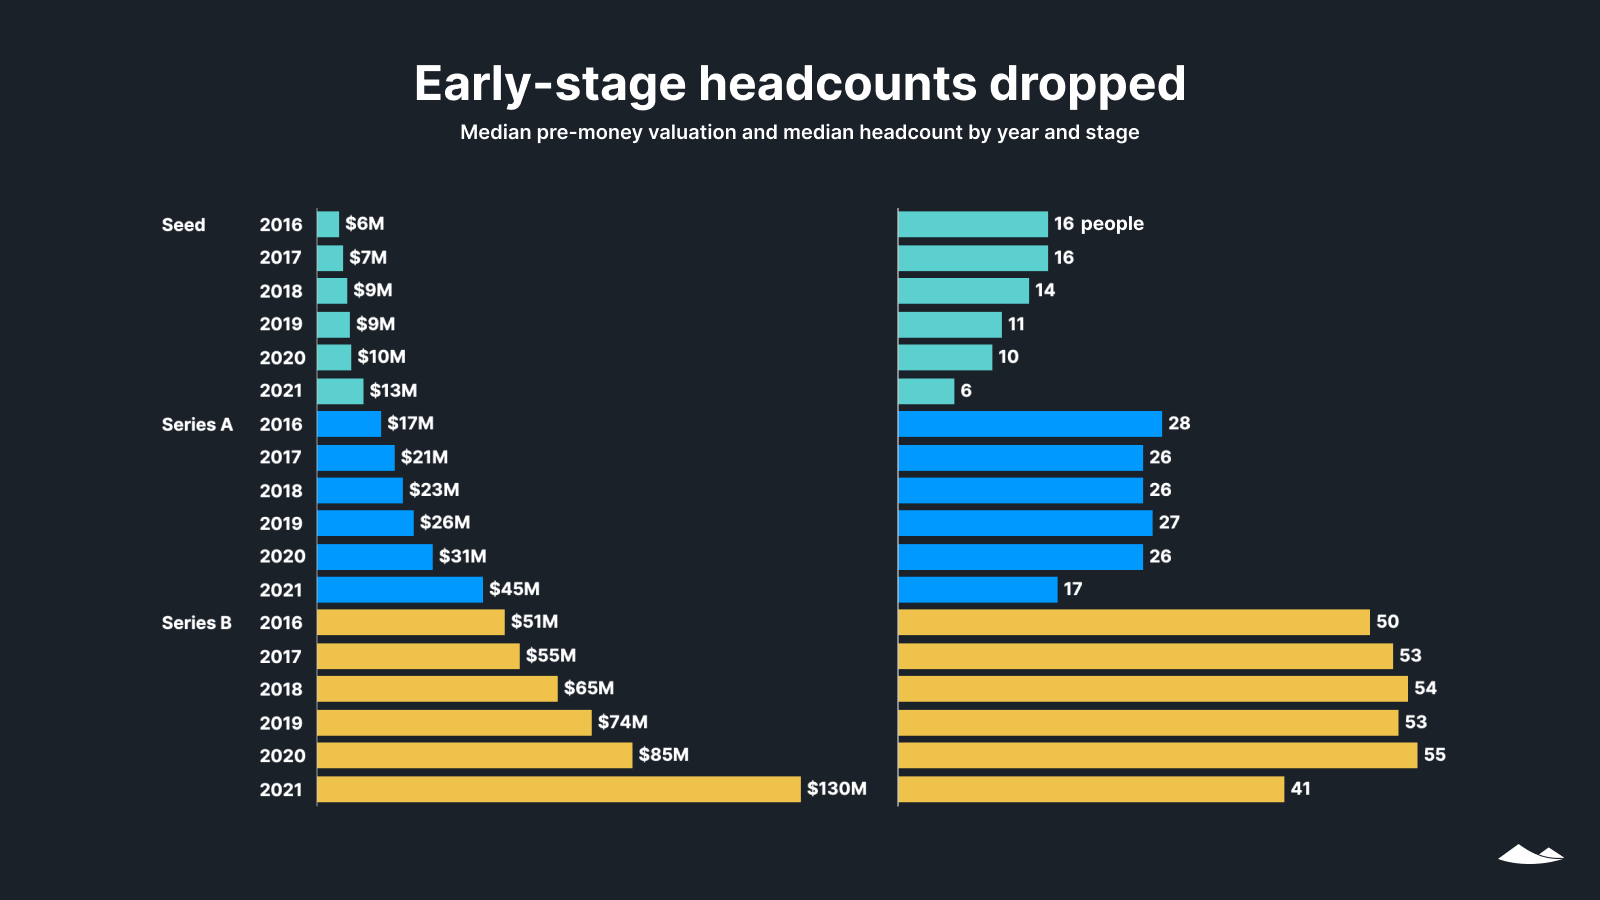 Early-stage headcounts dropped: Median pre-money valuation and median headcount by year and stage, 2016-2021